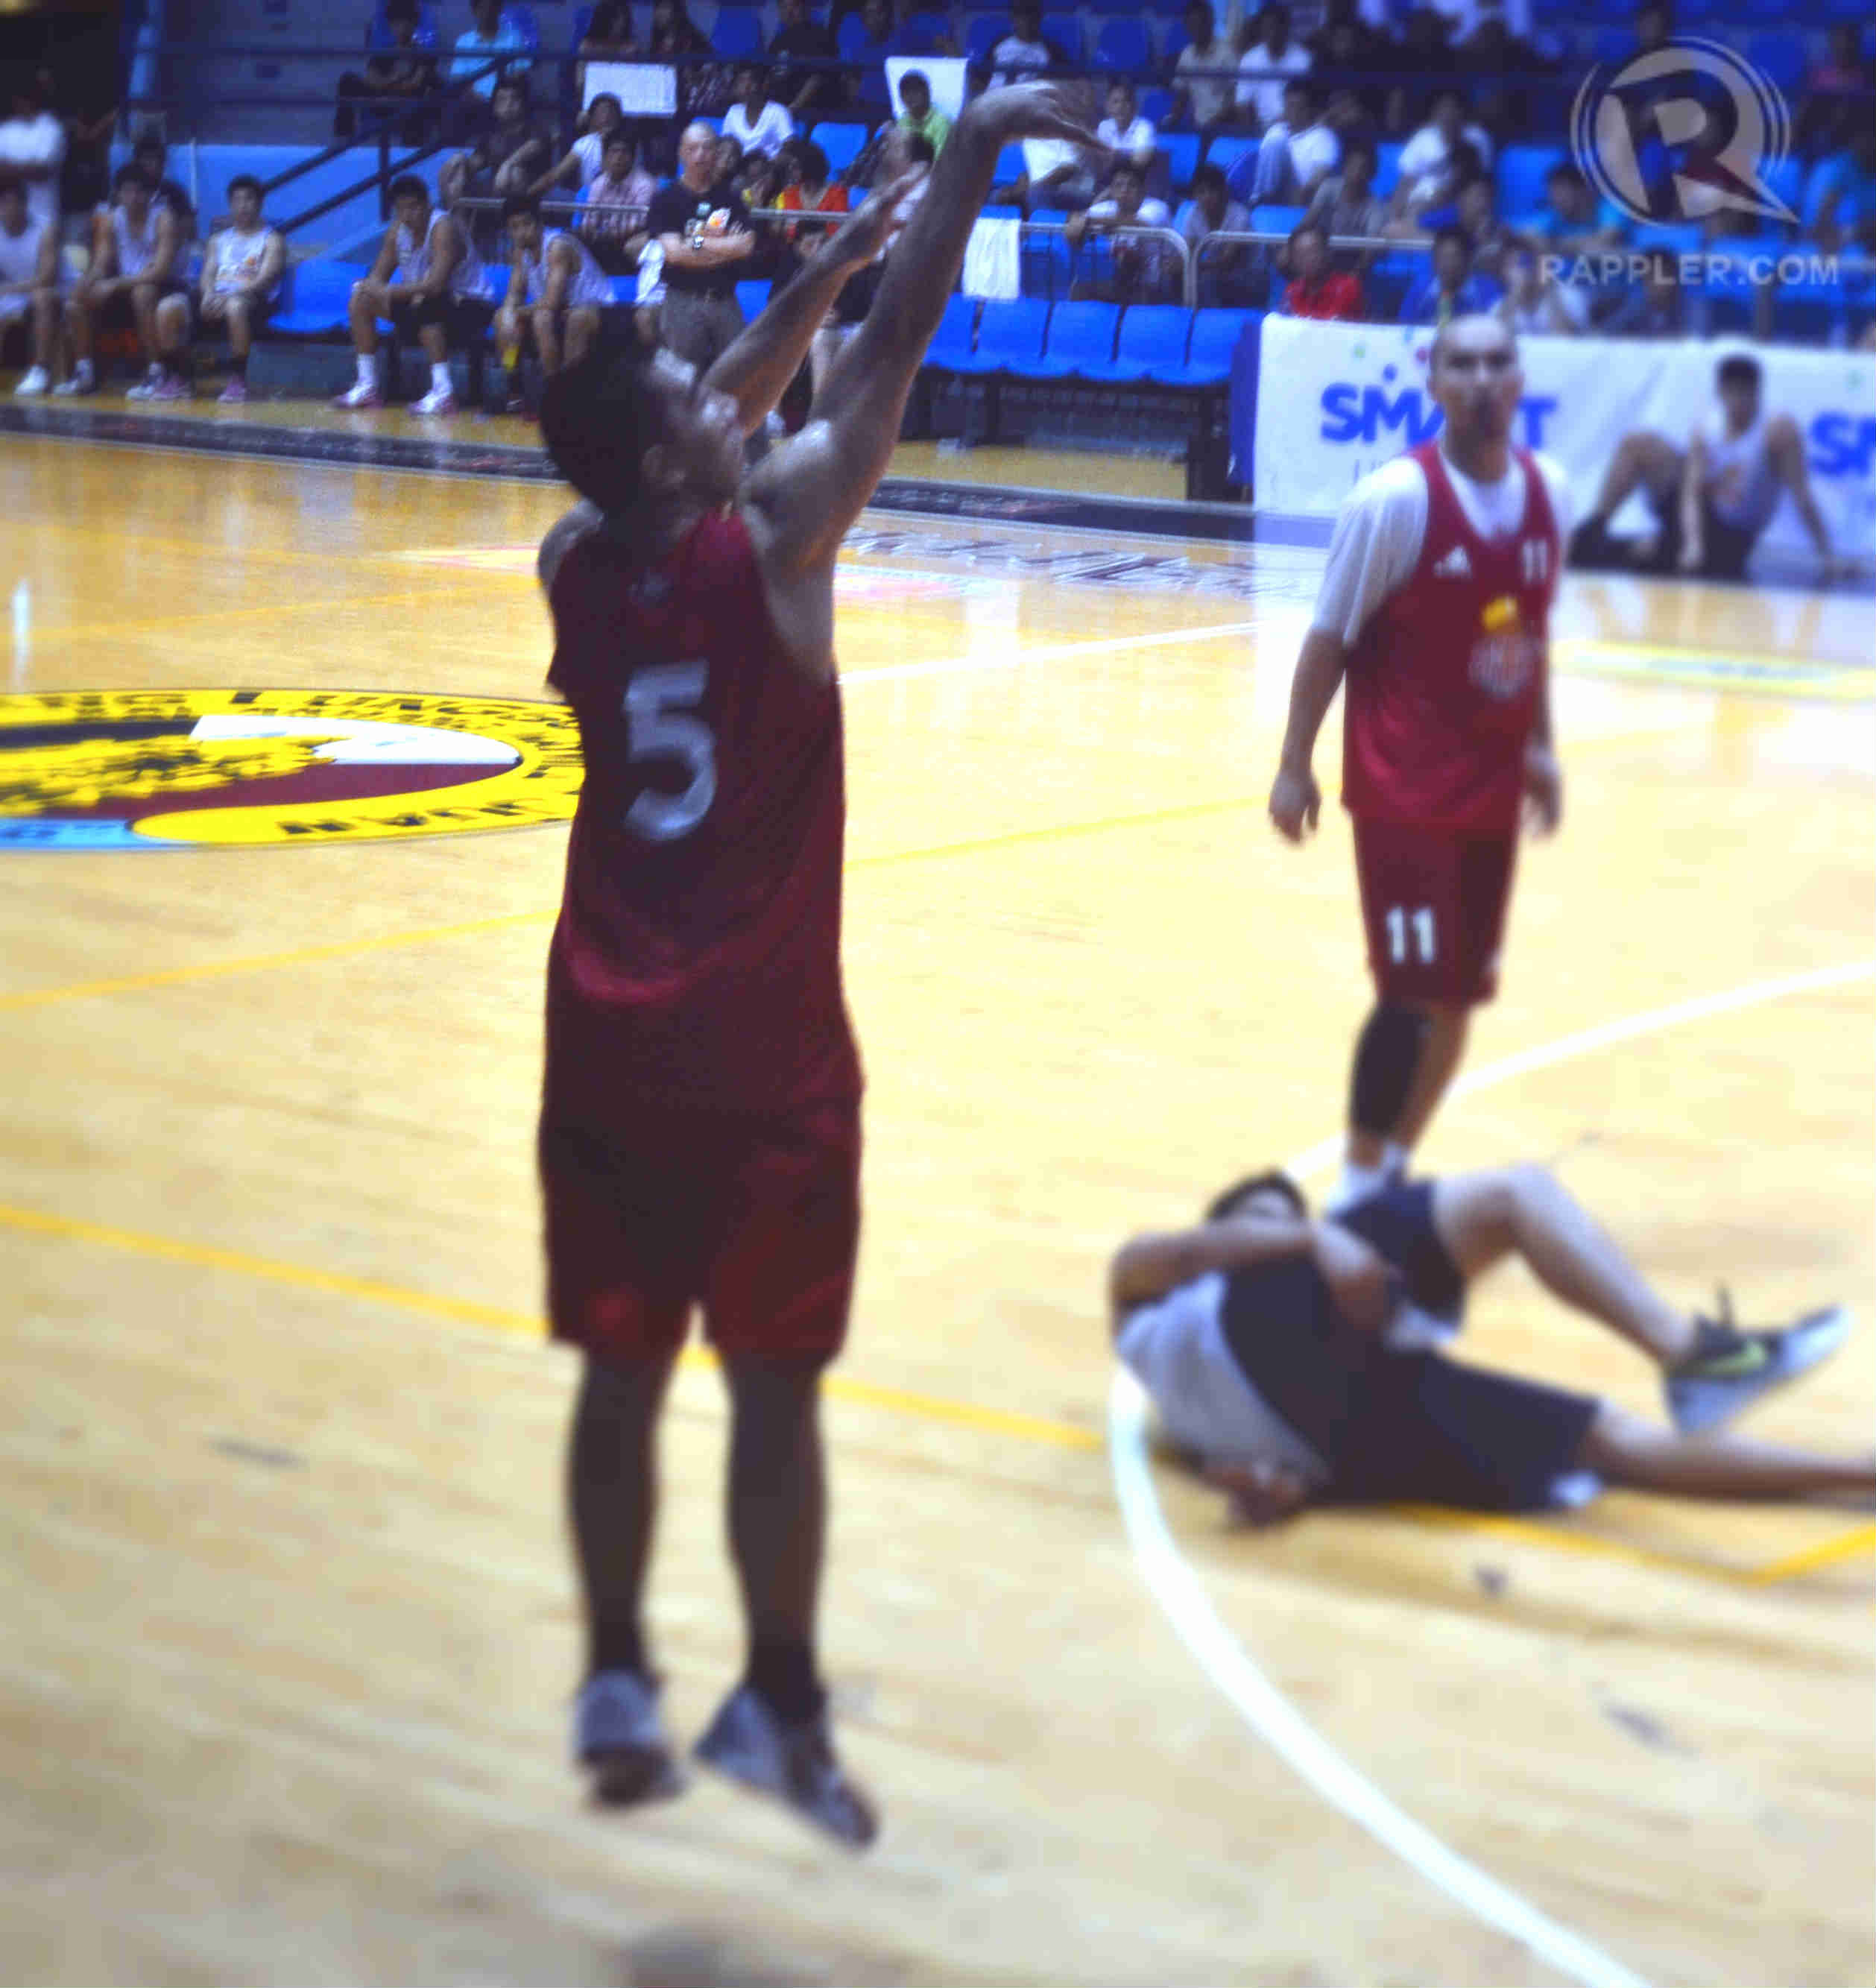 LA Tenorio goes up for a 3-pt shot in his first tune-up game with Ginebra.